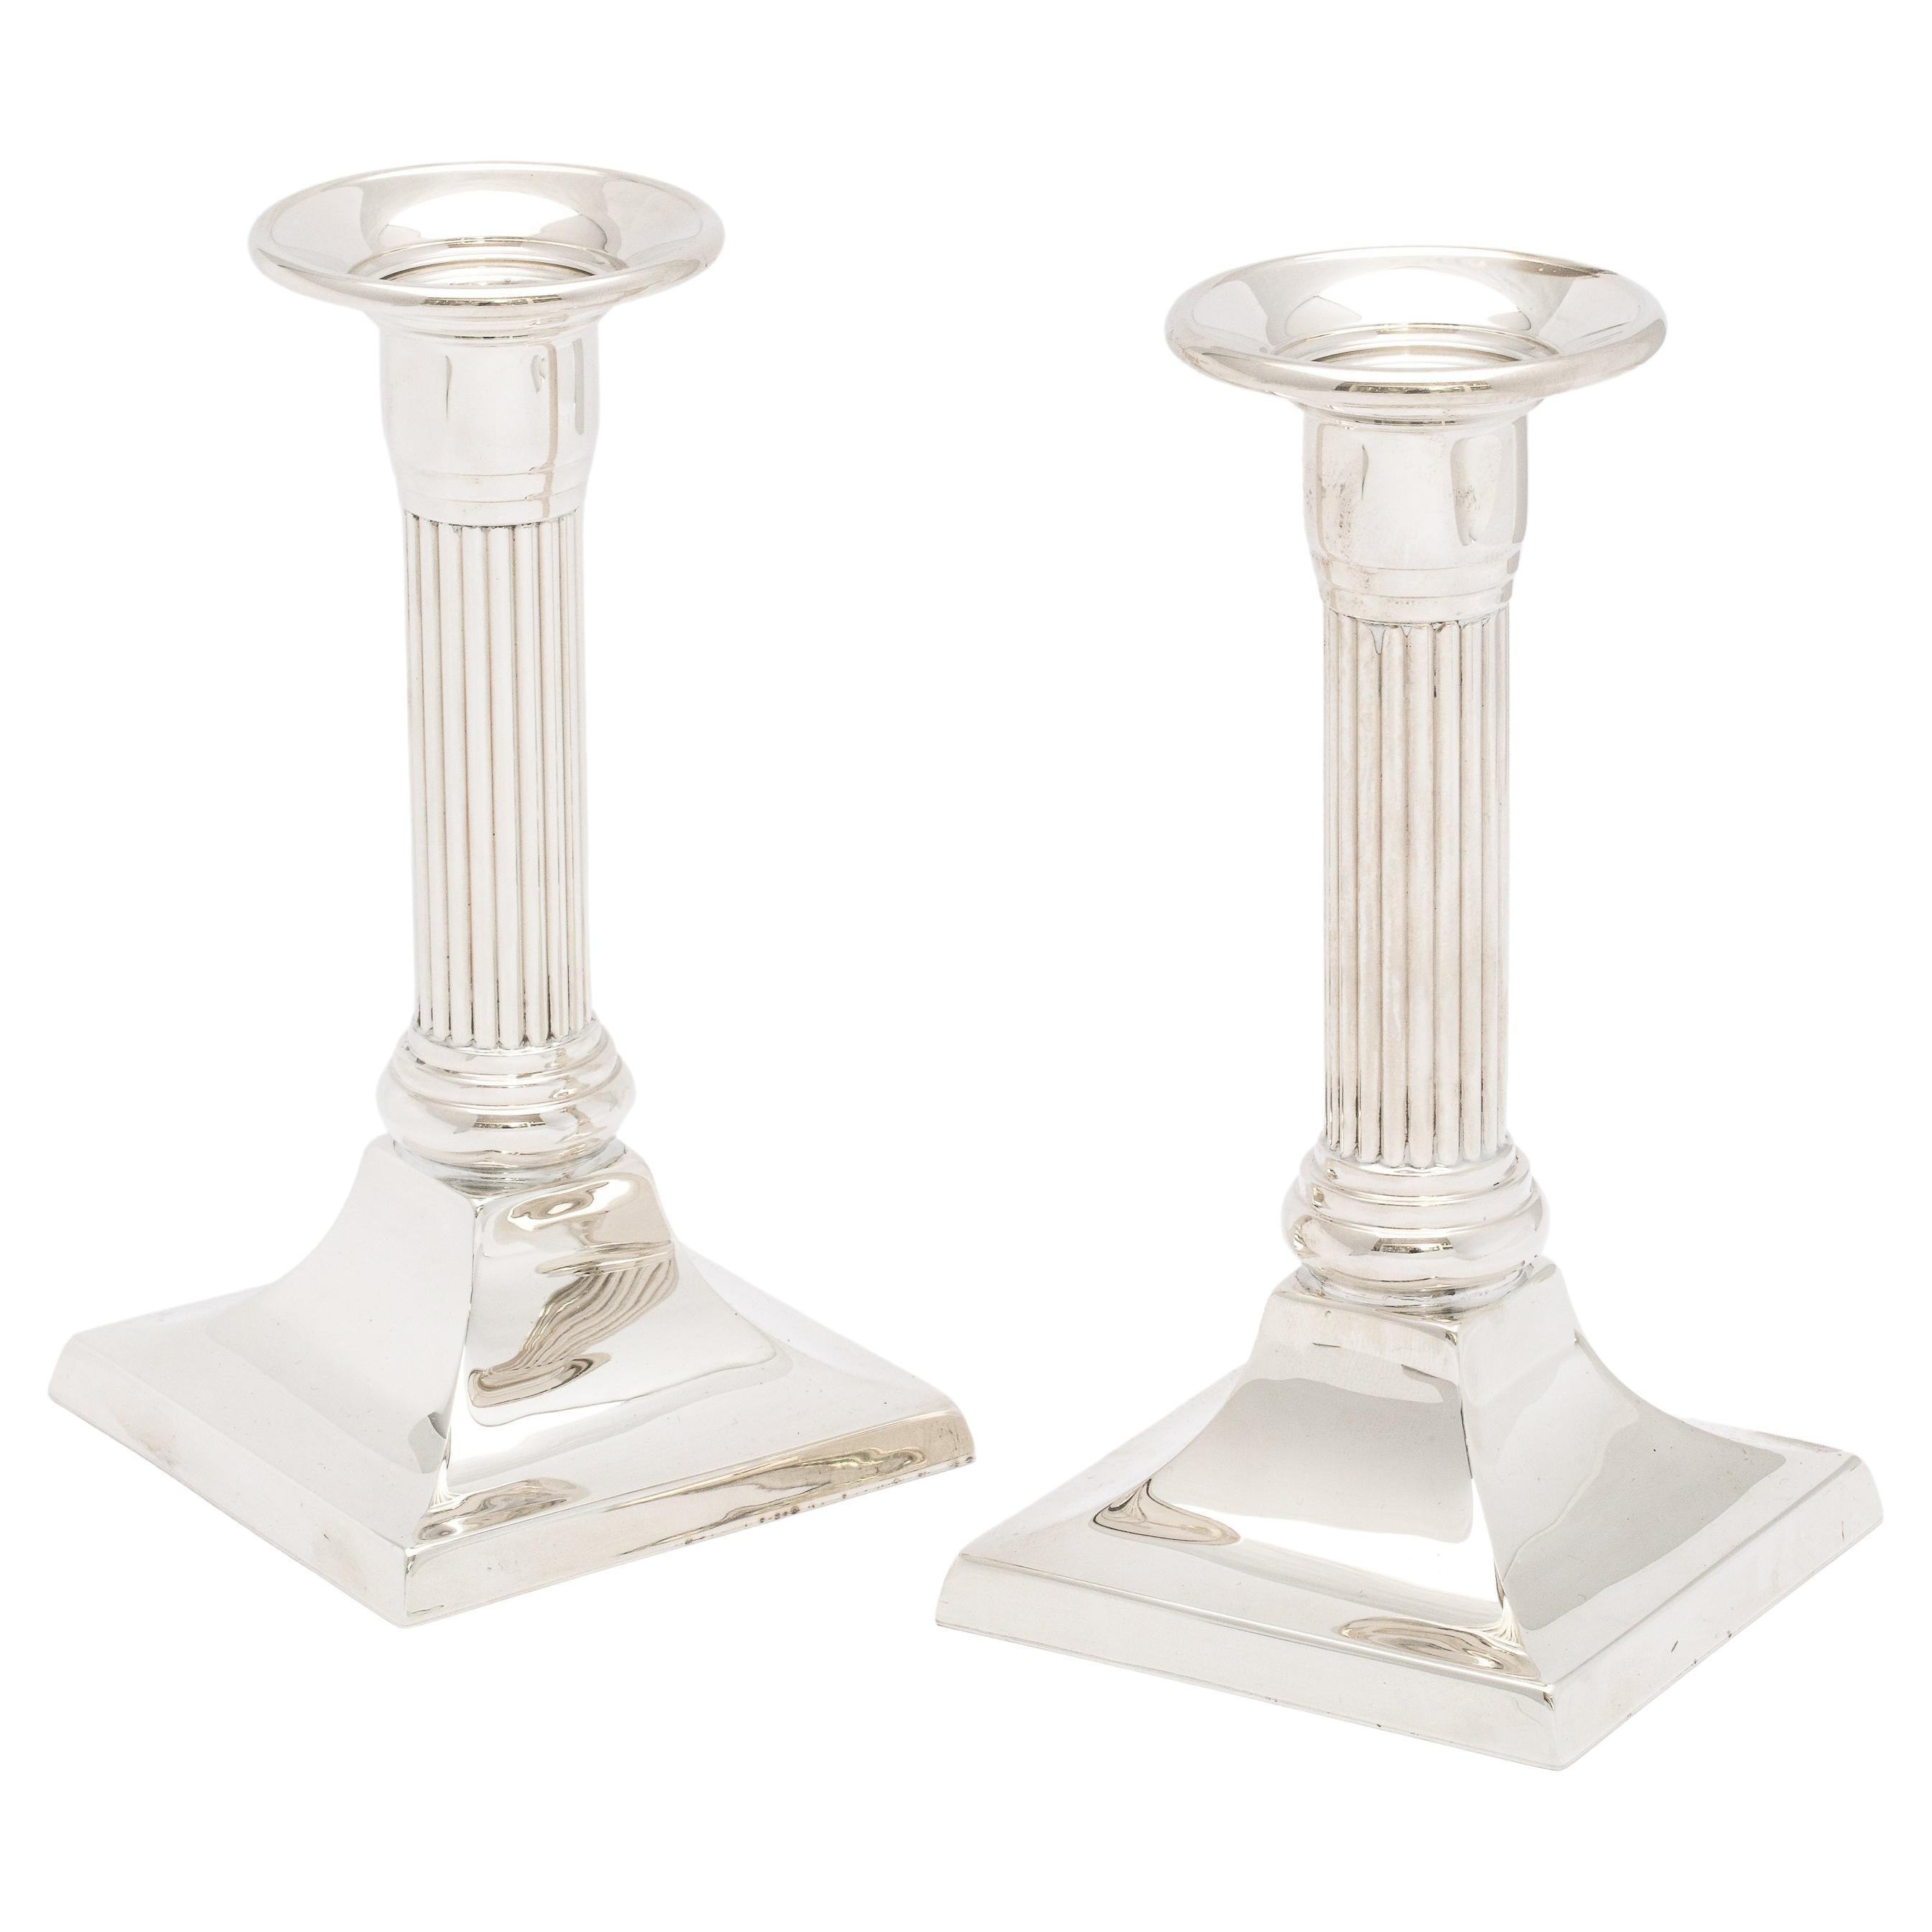 Pair of Neoclassical-Style Sterling Silver Column-Form Candlesticks